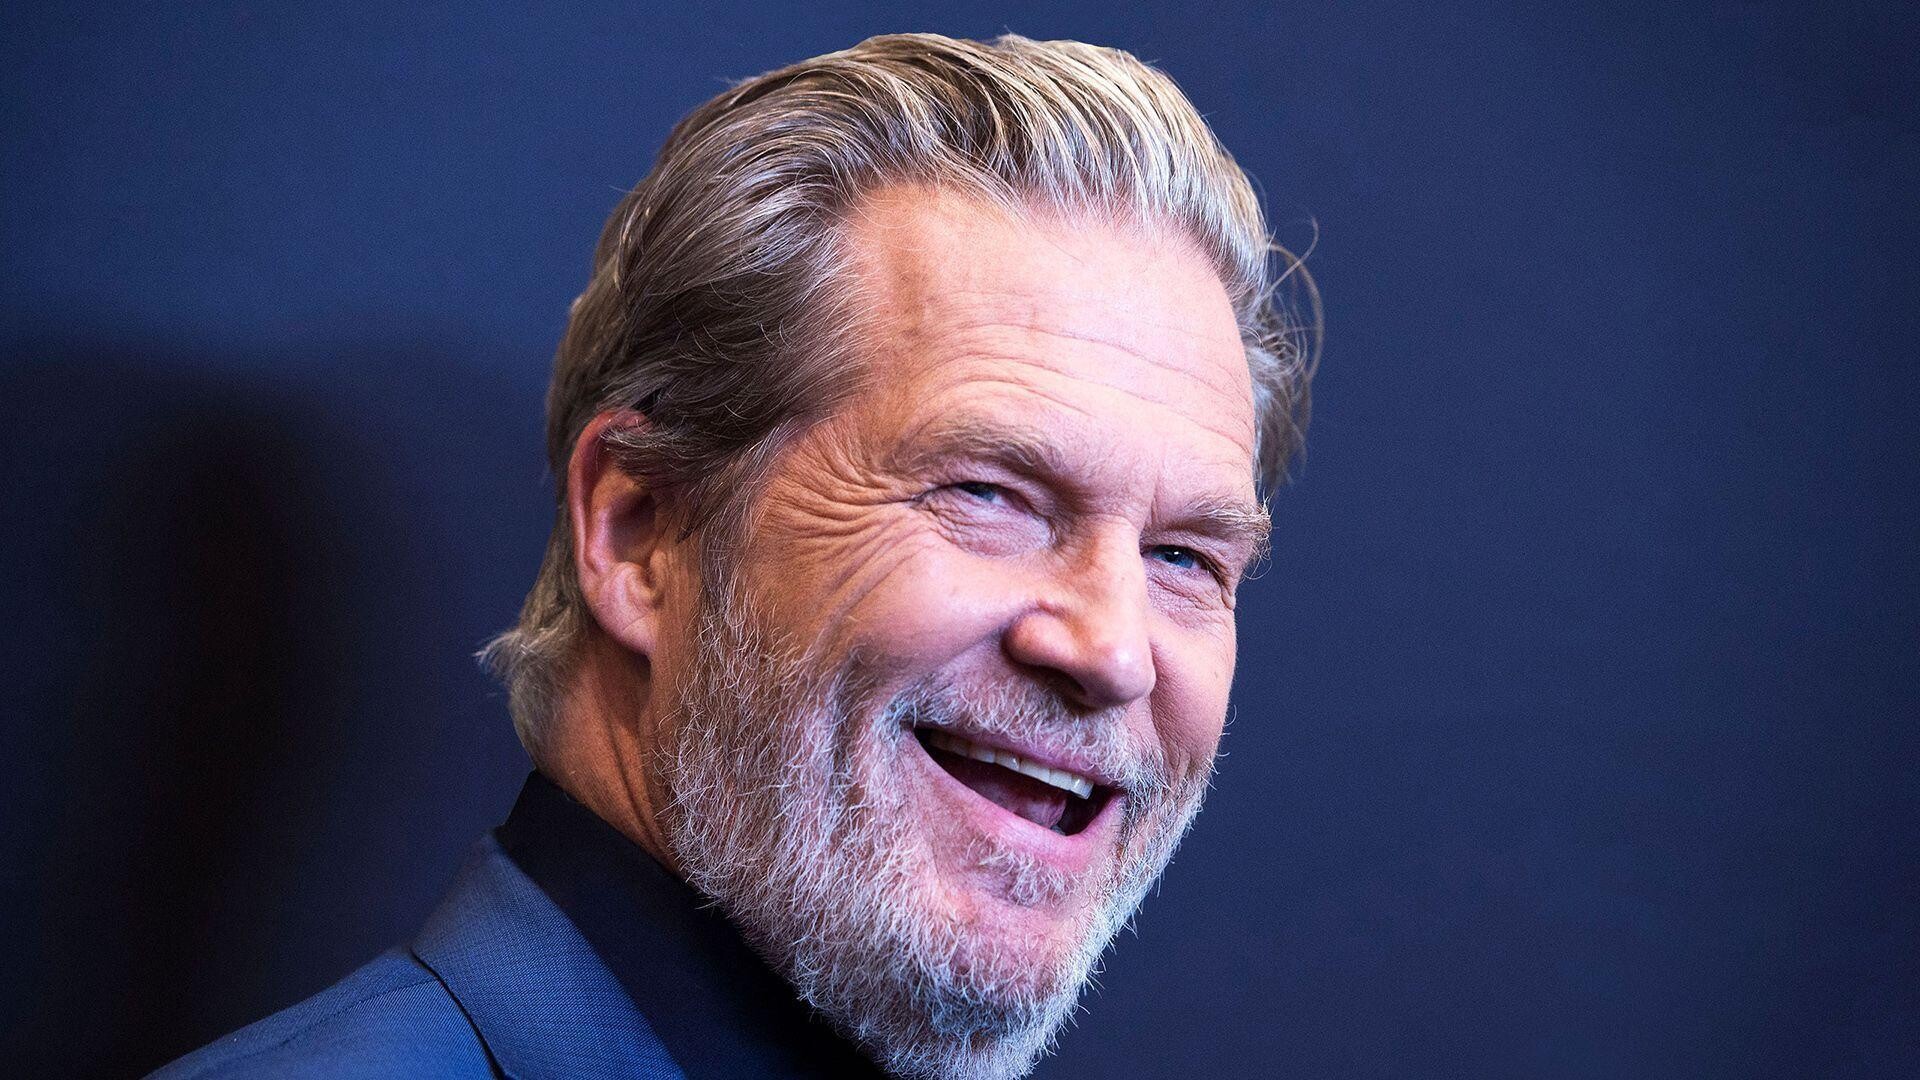 Jeff Bridges: Oscar nomination for Best Supporting Actor, Golden Globe and SAG nominations, An award-winner. 1920x1080 Full HD Wallpaper.